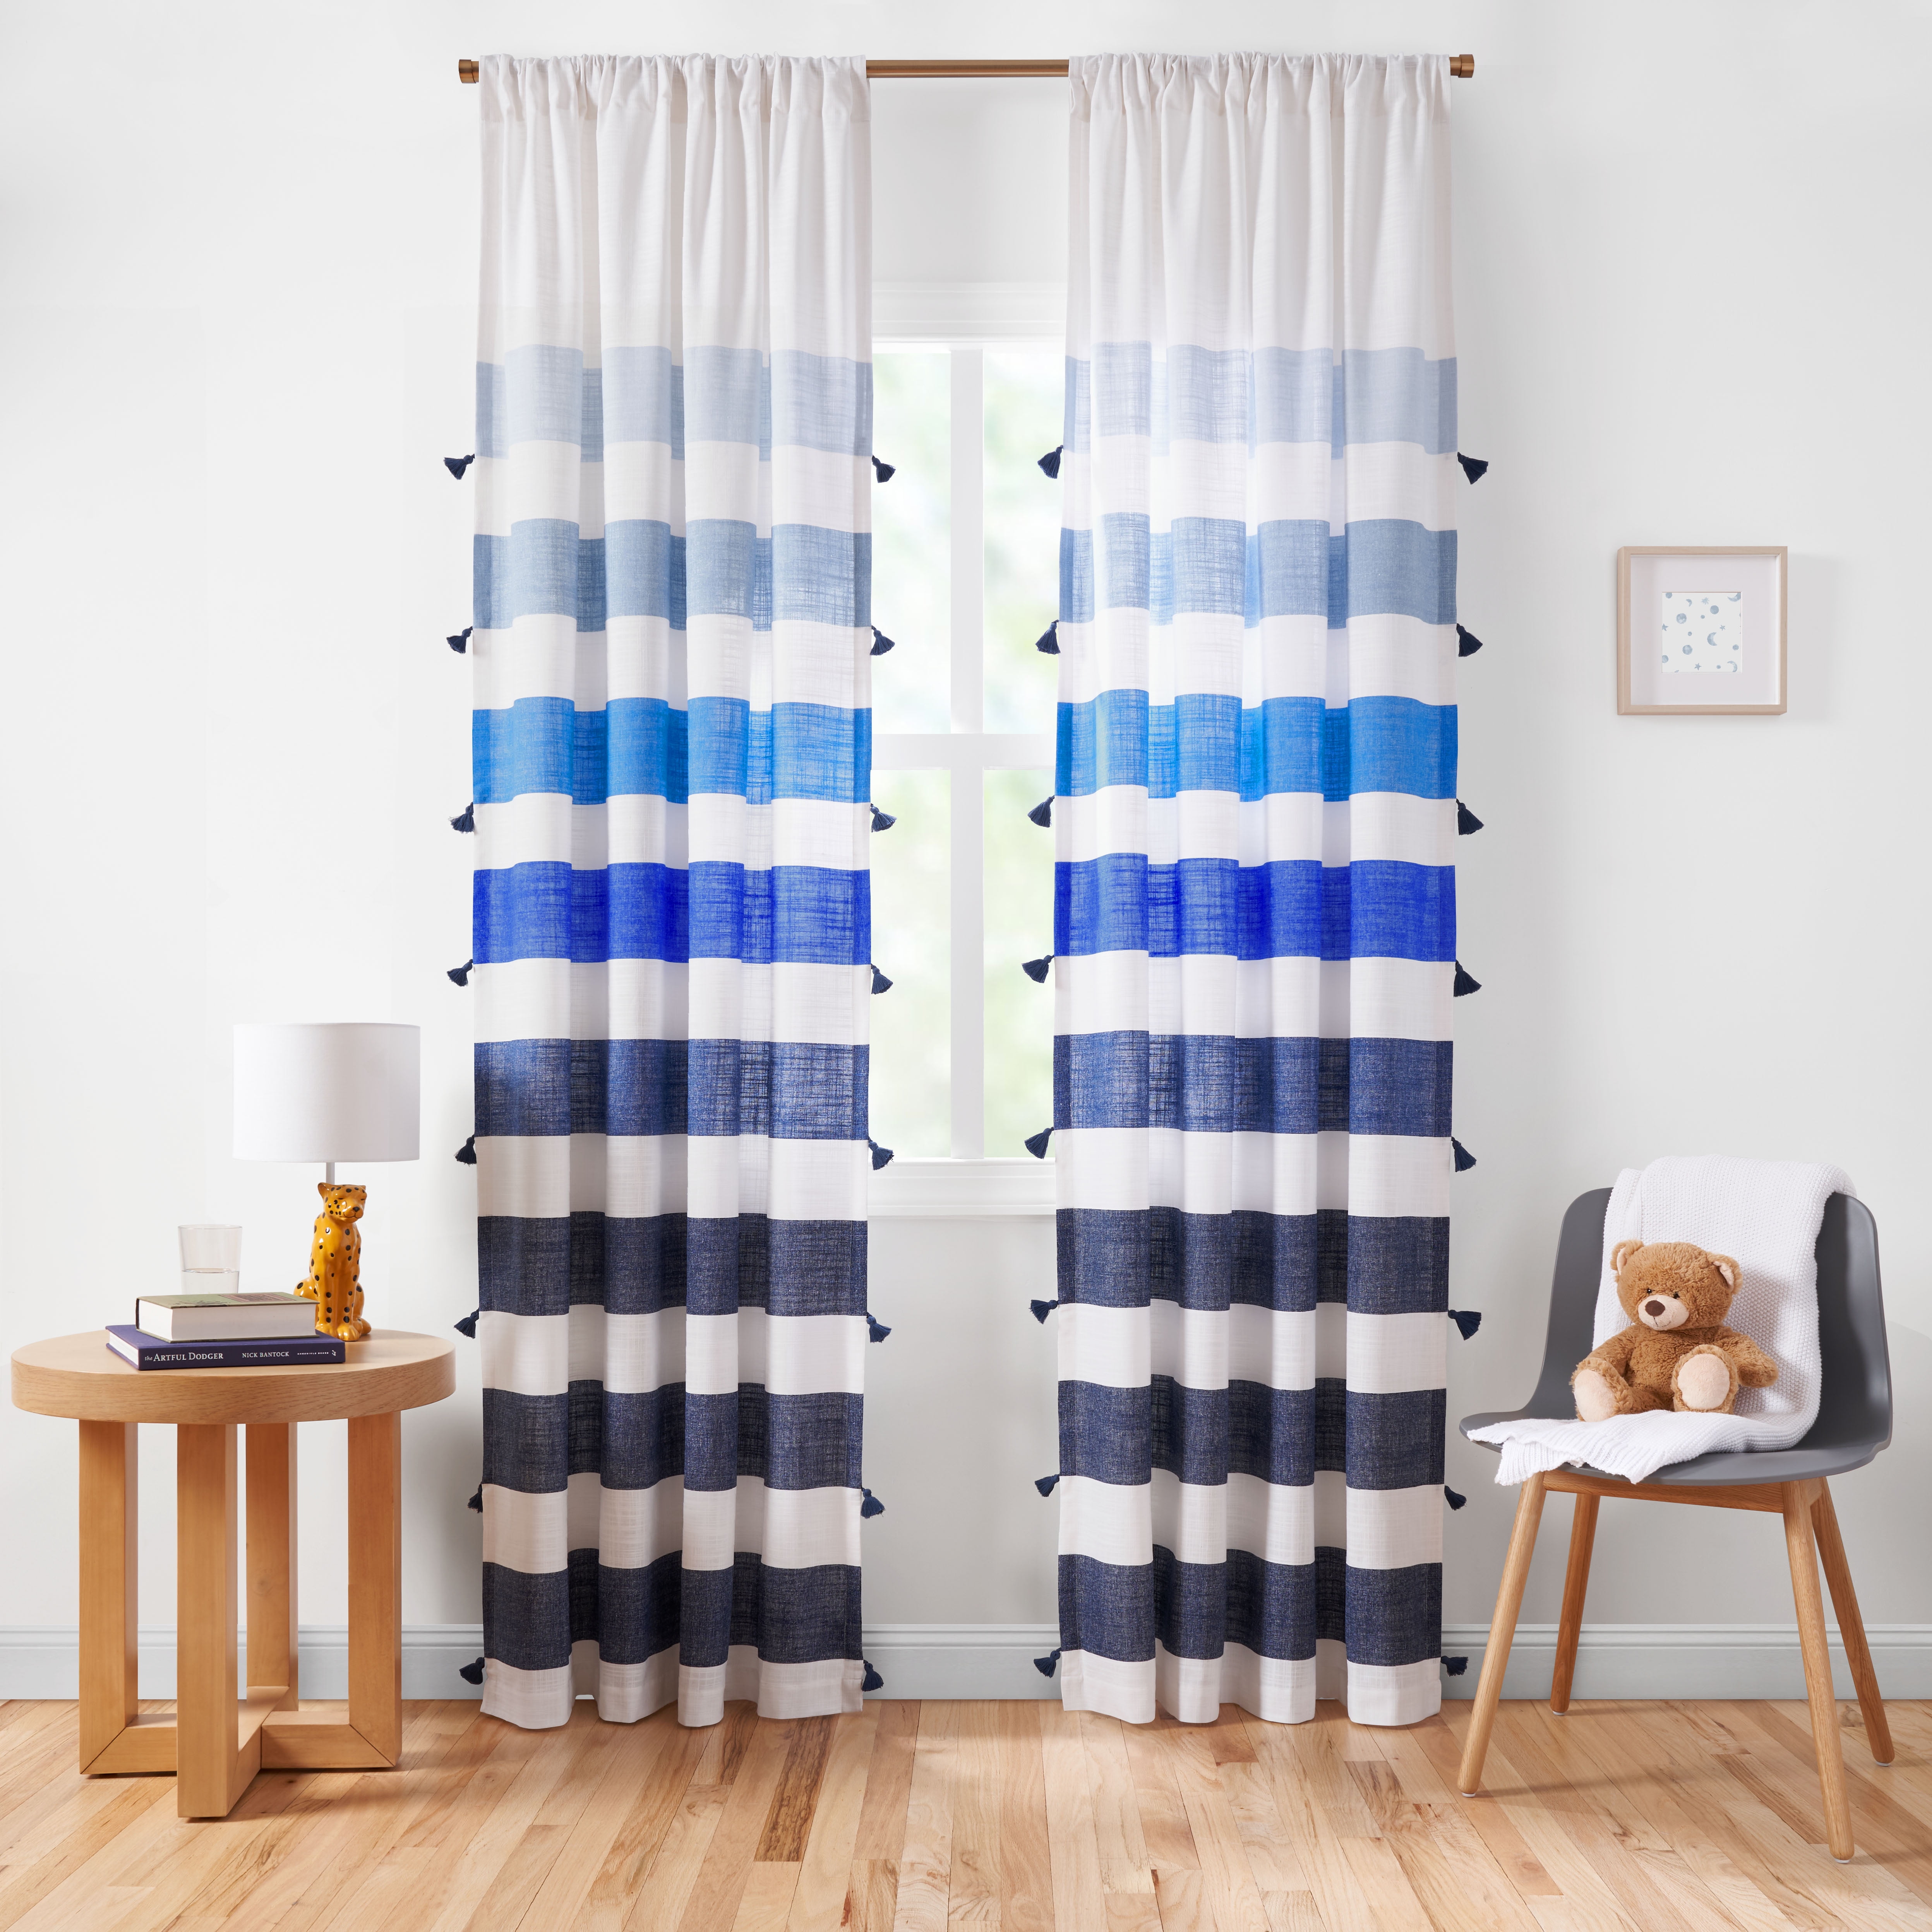 Ocean Stretches Away 3D Blockout Photo Curtain Print Curtains Fabric Kids Window 